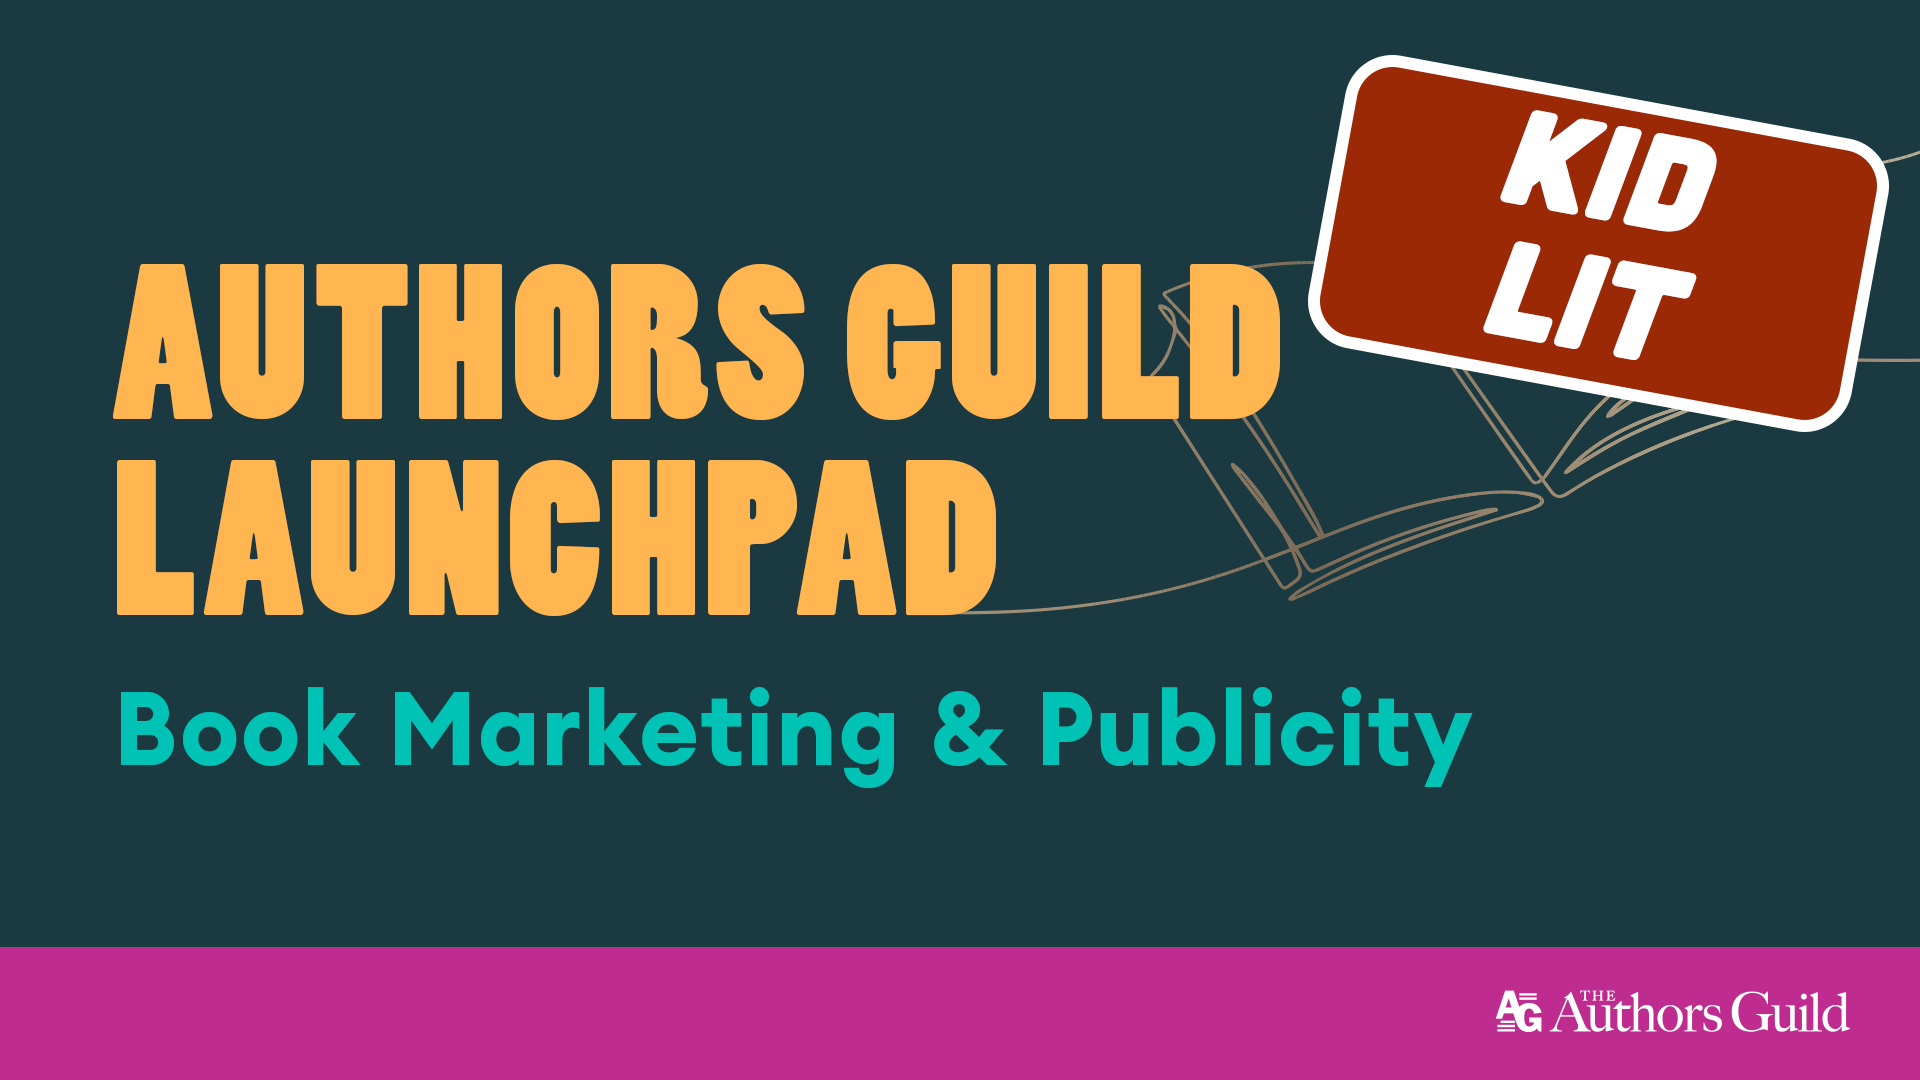 Authors Guild Launchpad Book Marketing and Publicity: Kid Lit